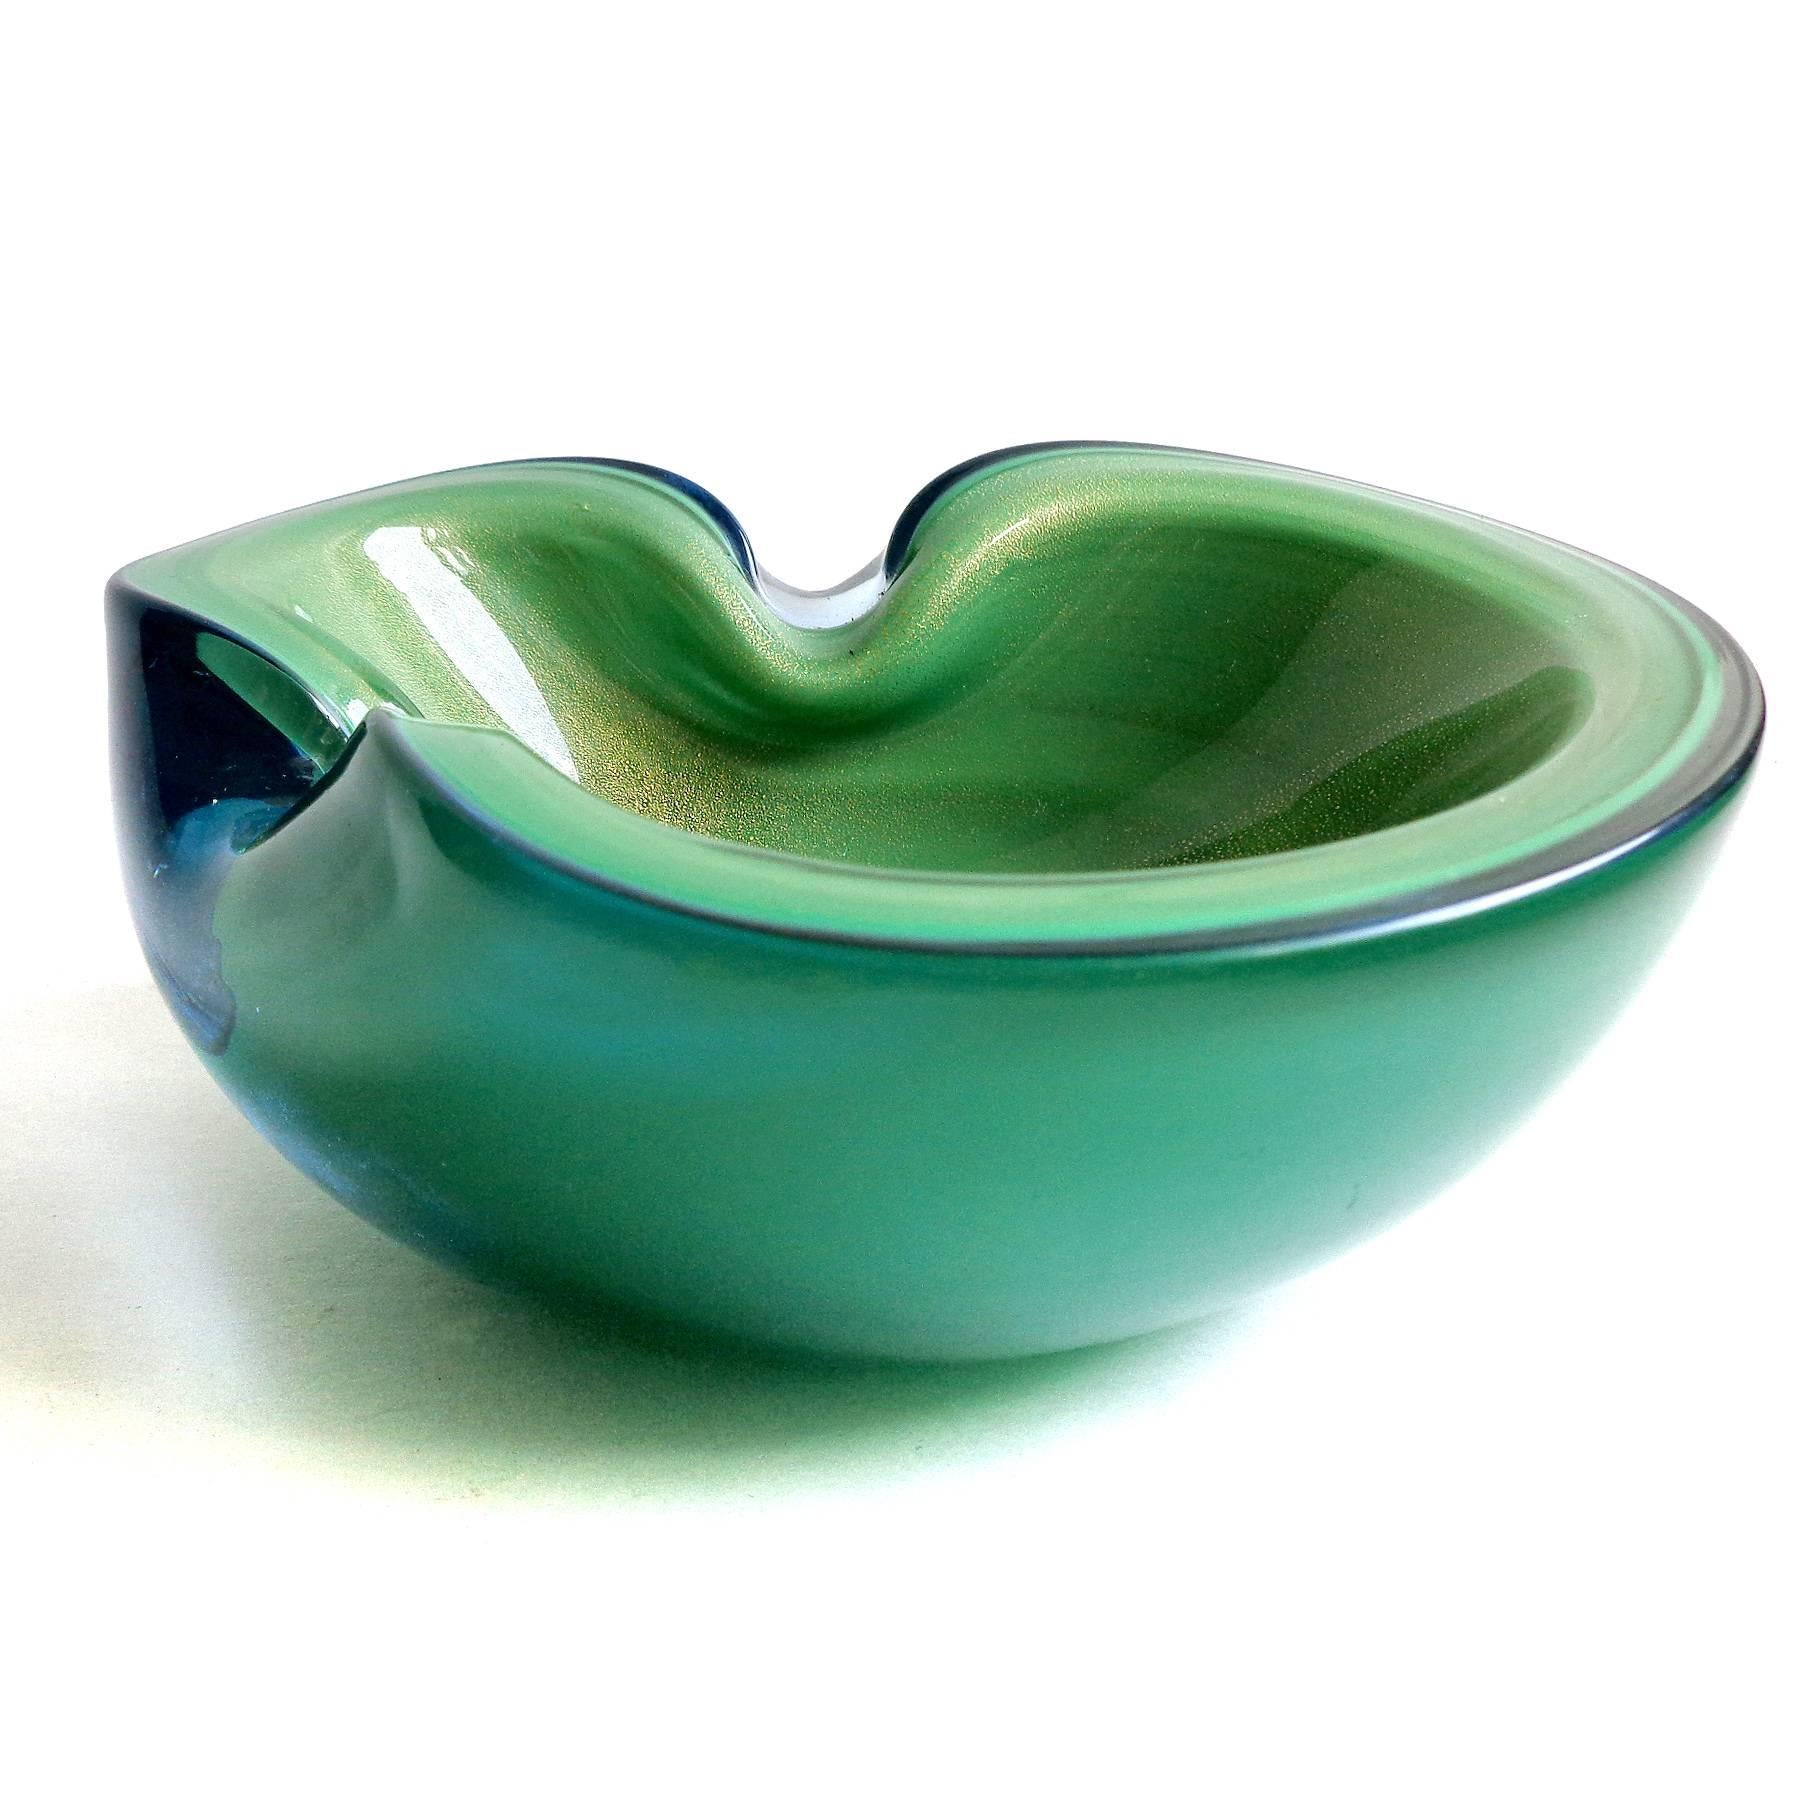 Beautiful Murano hand blown green and gold flecks Italian art glass bowl. Documented to designer Alfredo Barbini. Has two indents on the rim, and filled with gold leaf on the inside. A hint of clear blue on the outside clear layer. Beautiful